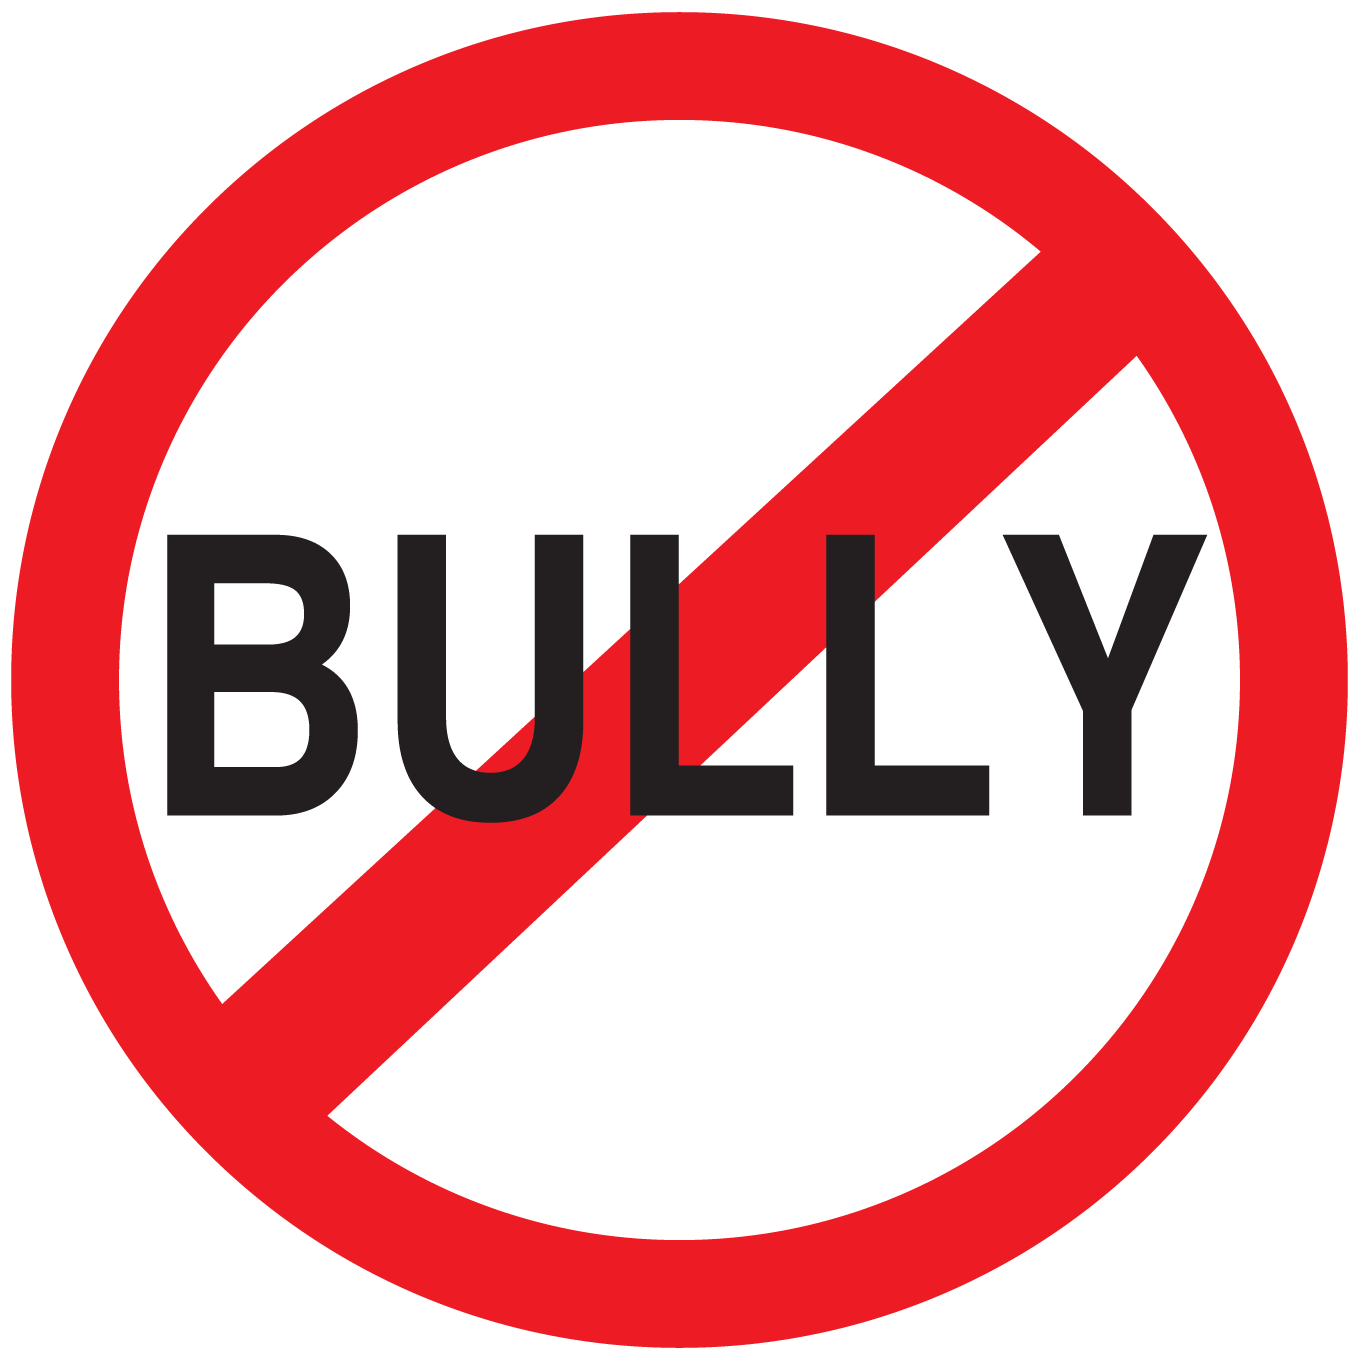 clipart on bullying - photo #42